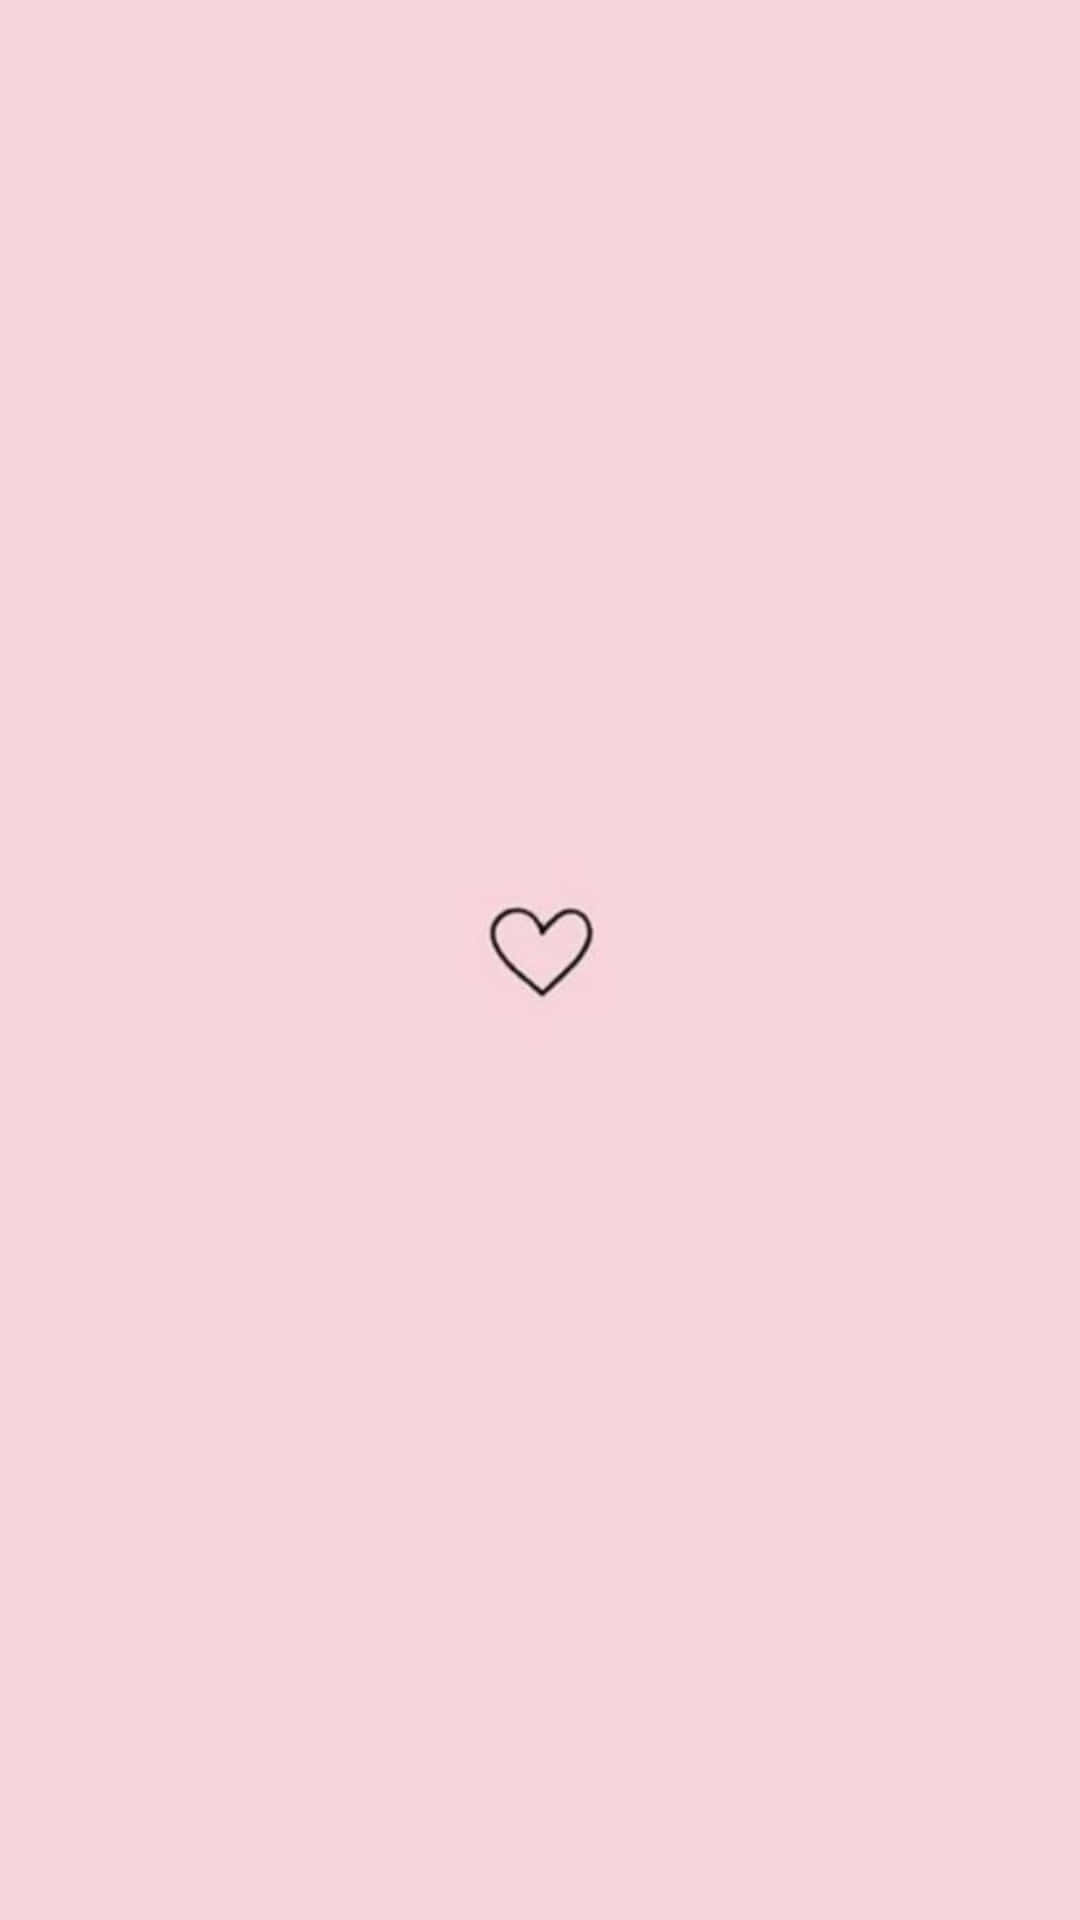 A Pink Background With A Heart On It